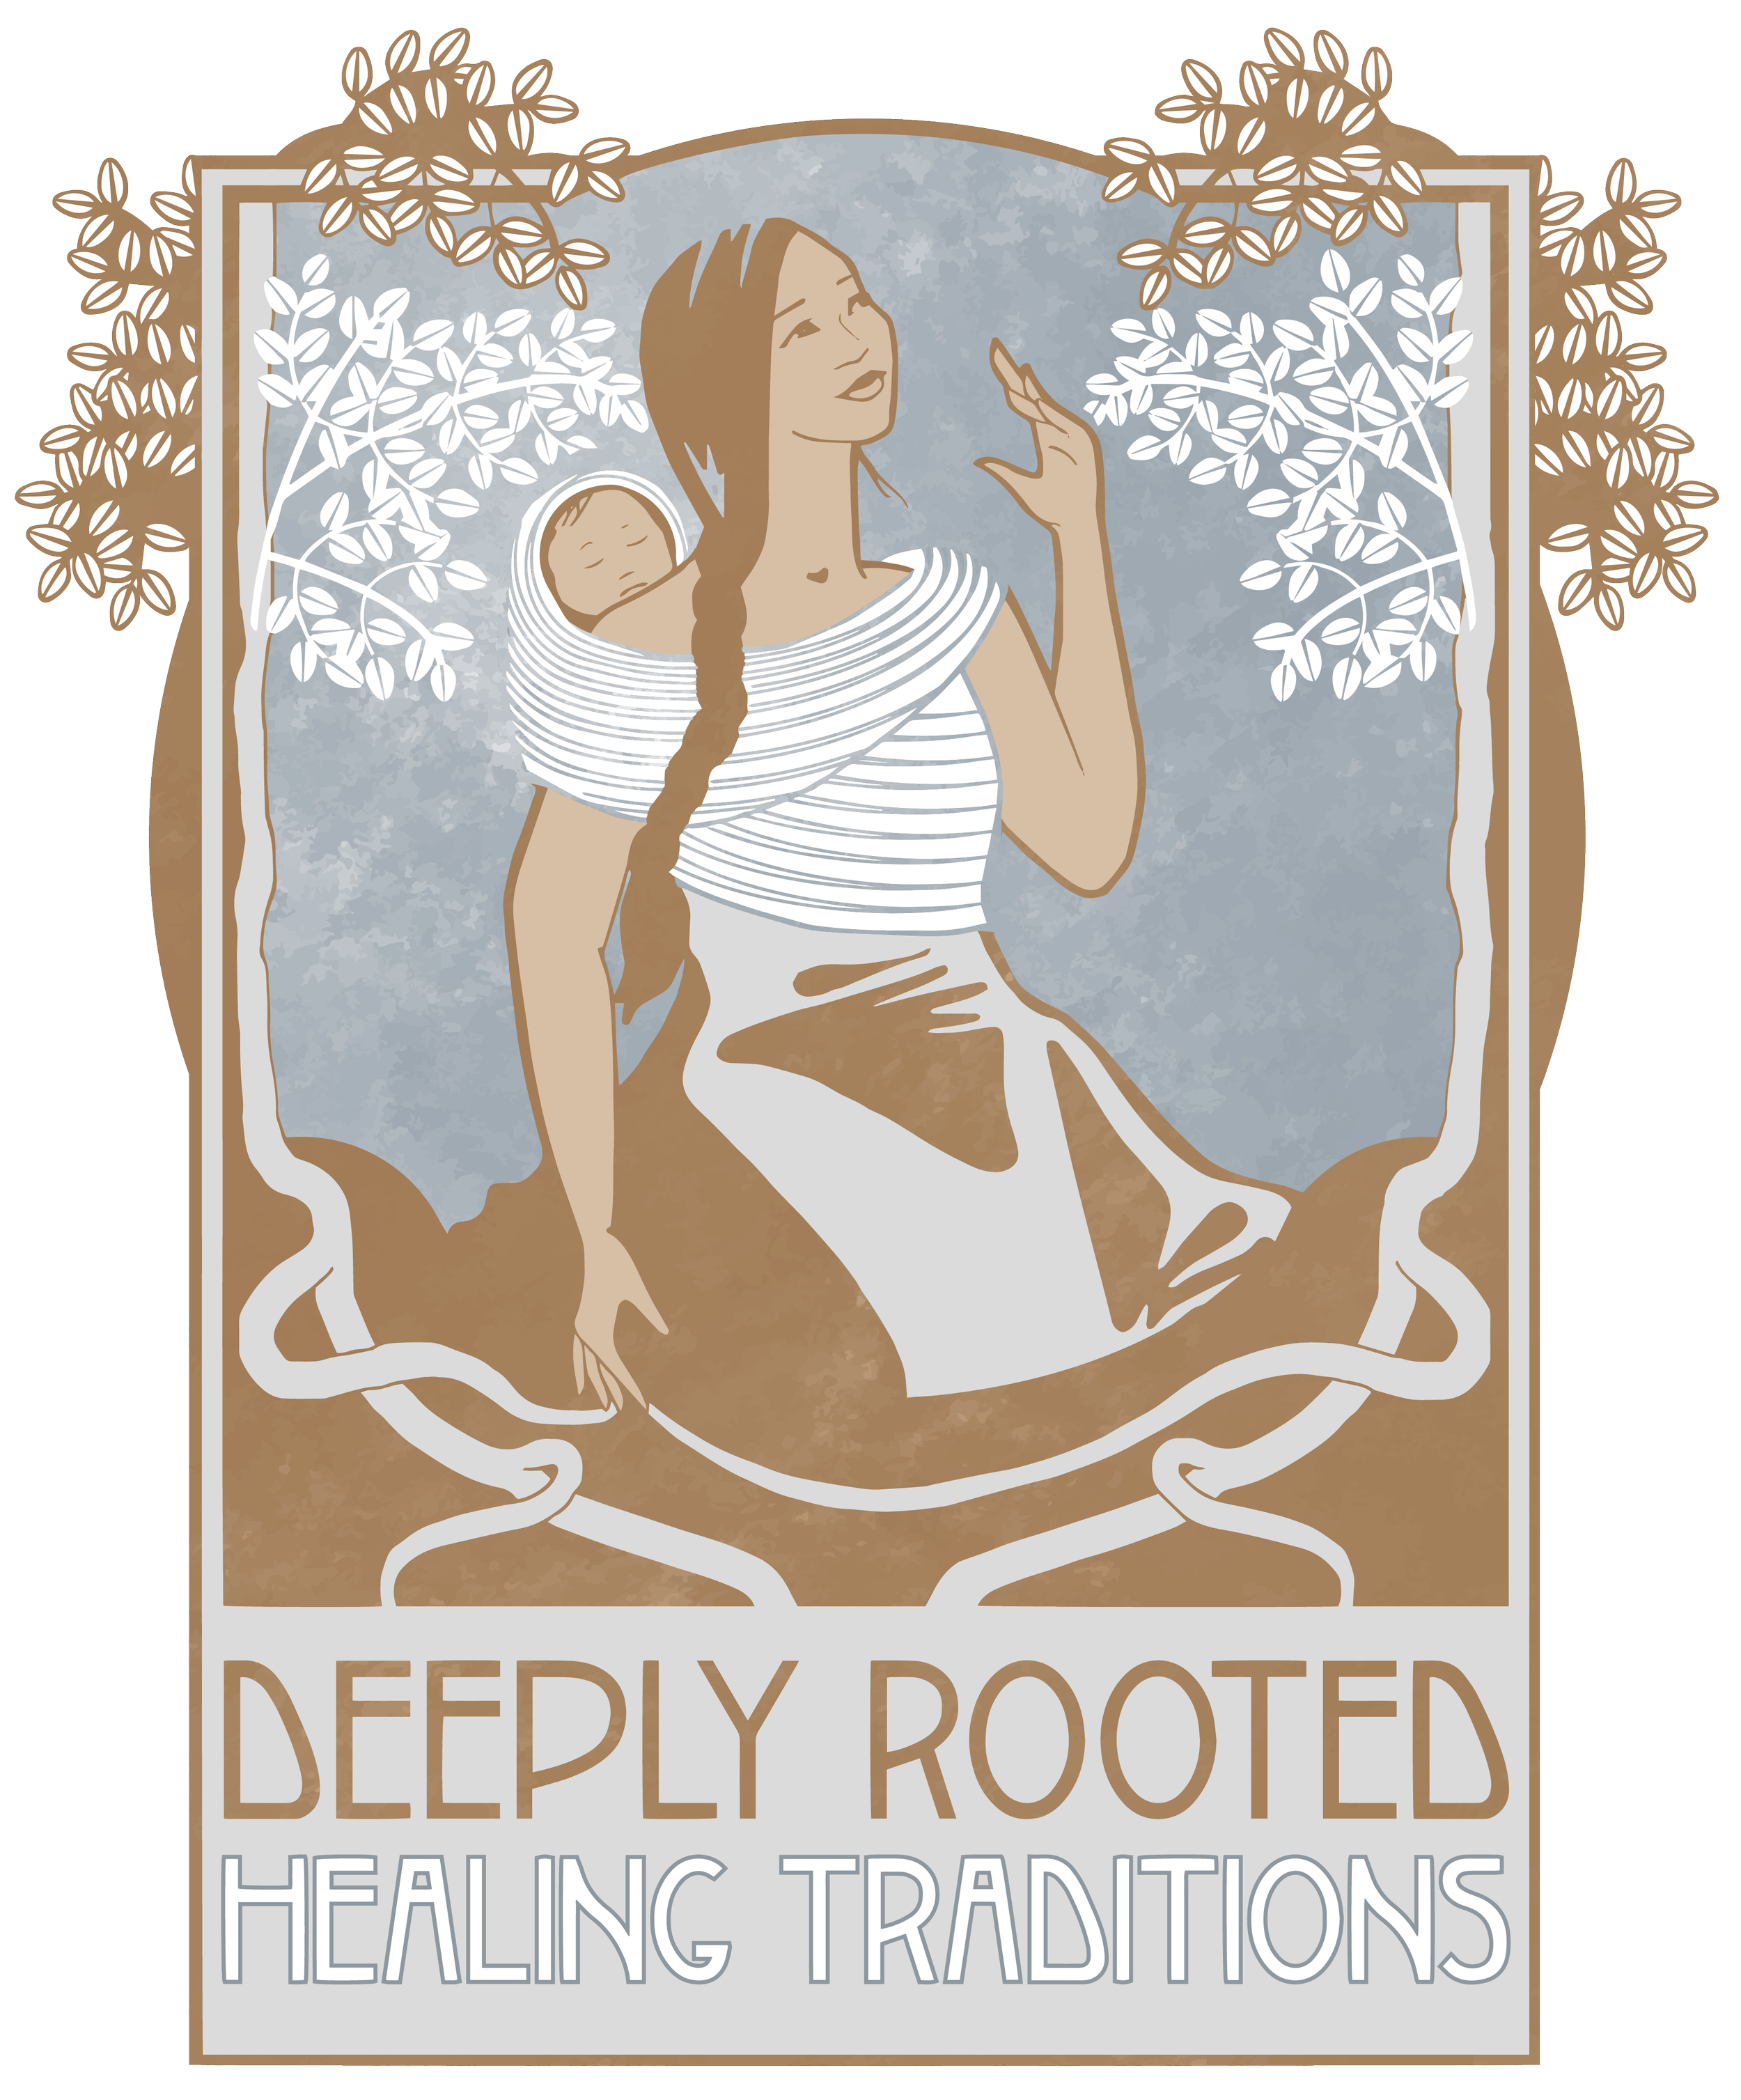 DEEPLY ROOTED HEALING